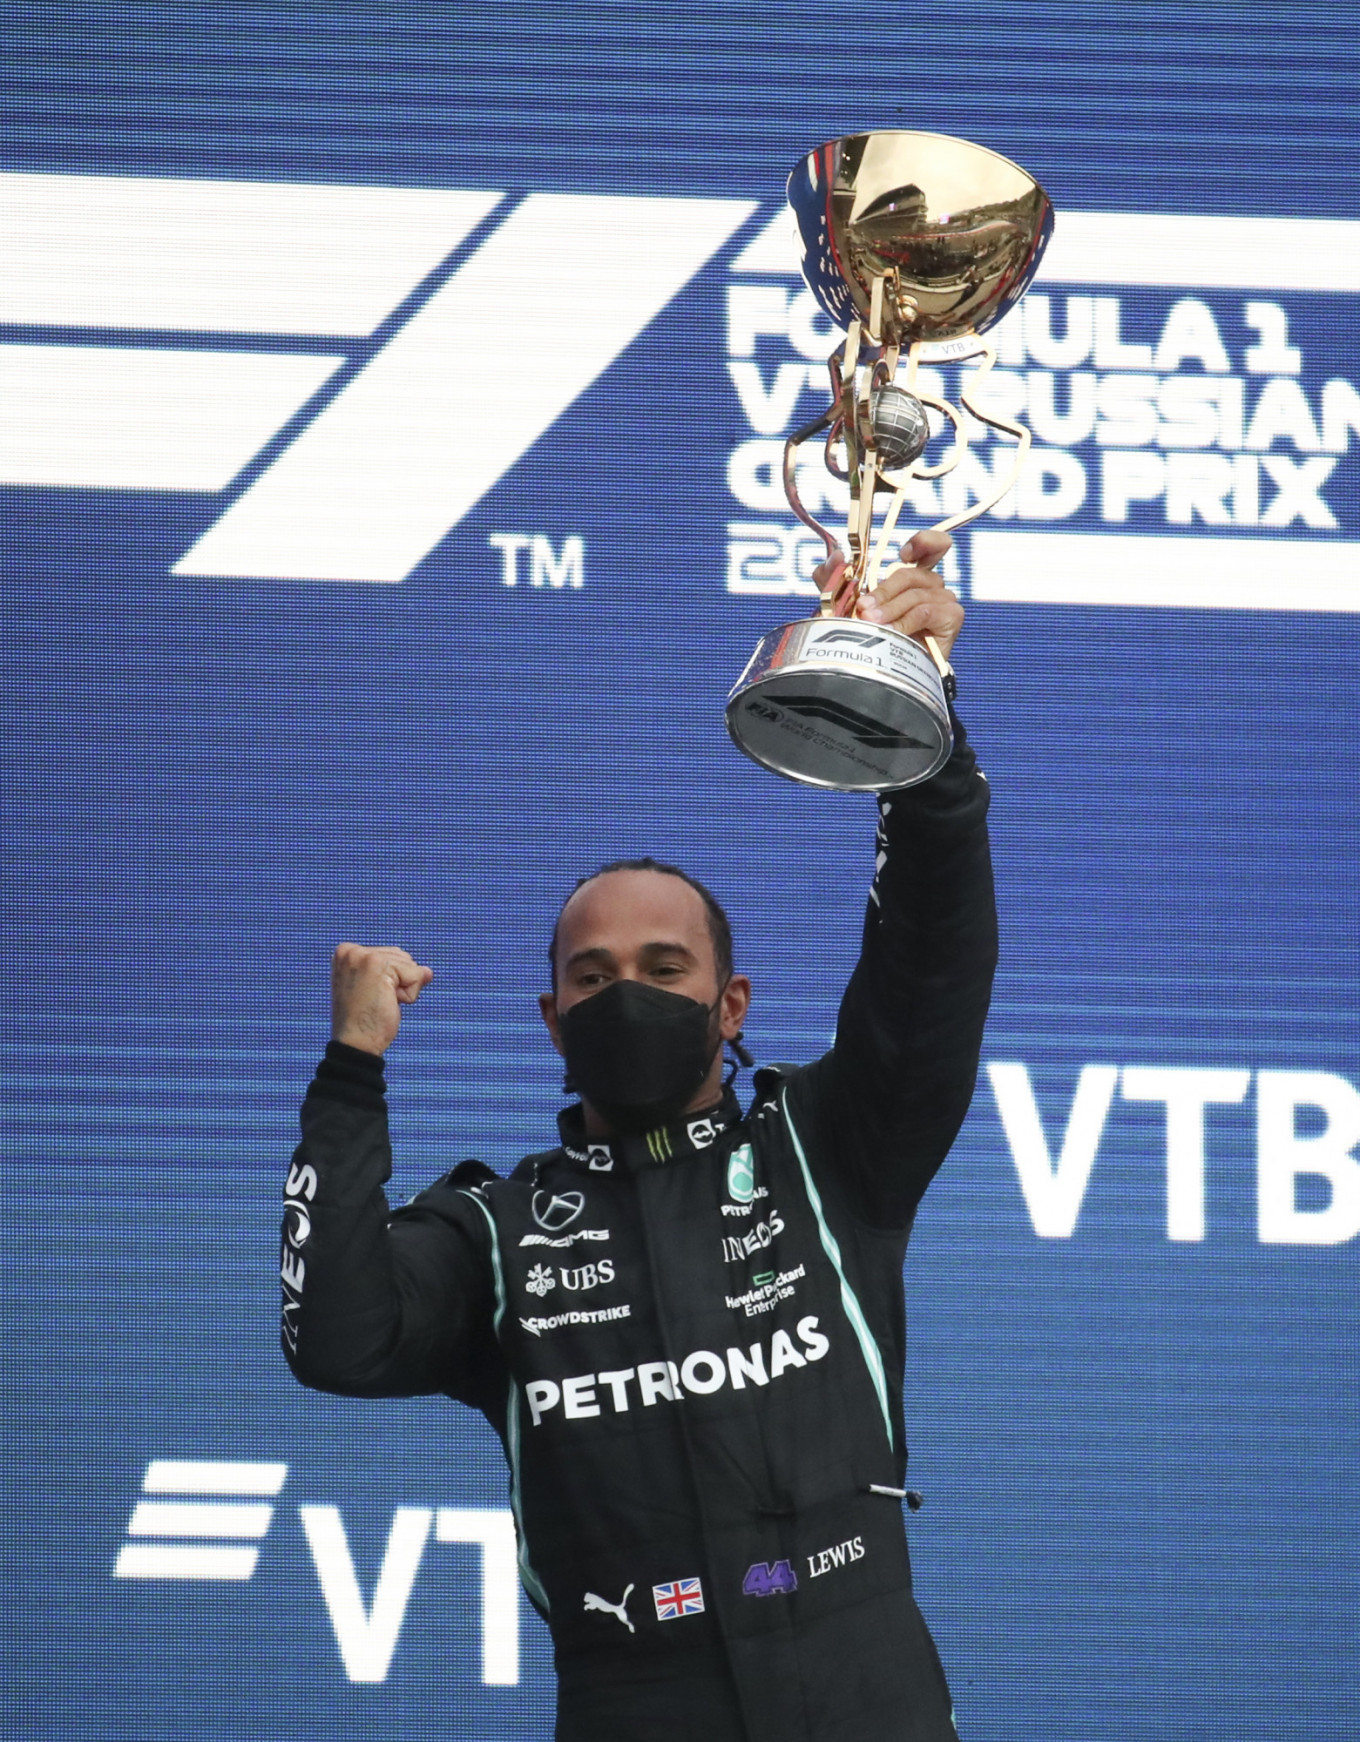 Hamilton Claims 100th Win Amid High Drama in Russia – The Moscow Times